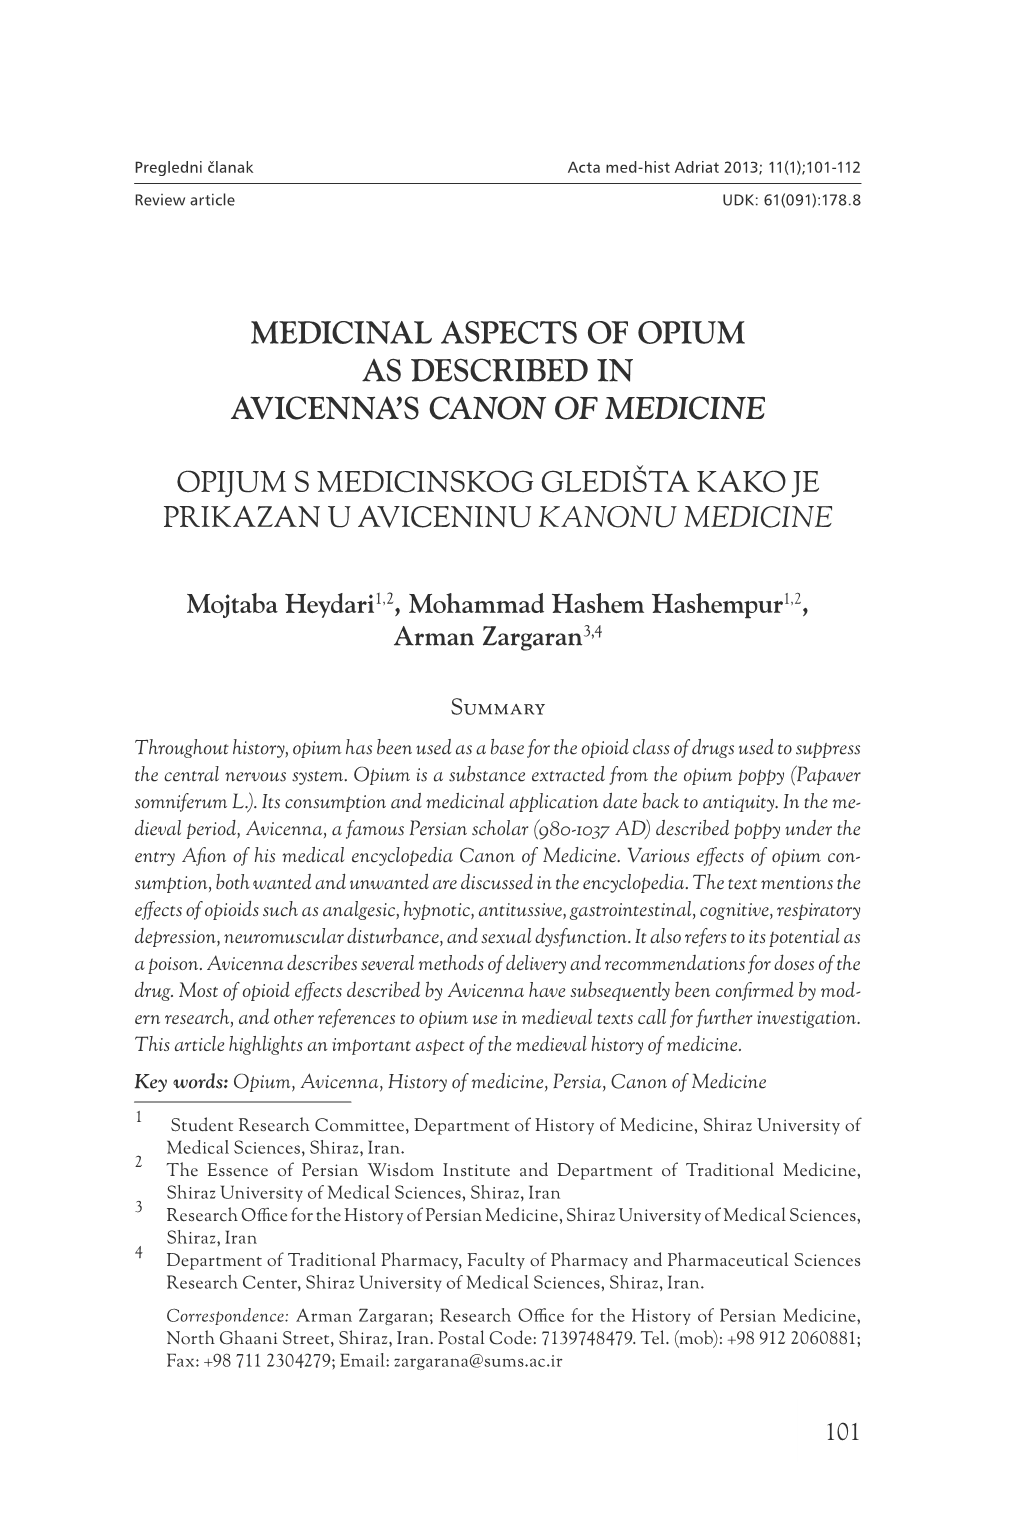 Medicinal Aspects of Opium As Described in Avicenna's